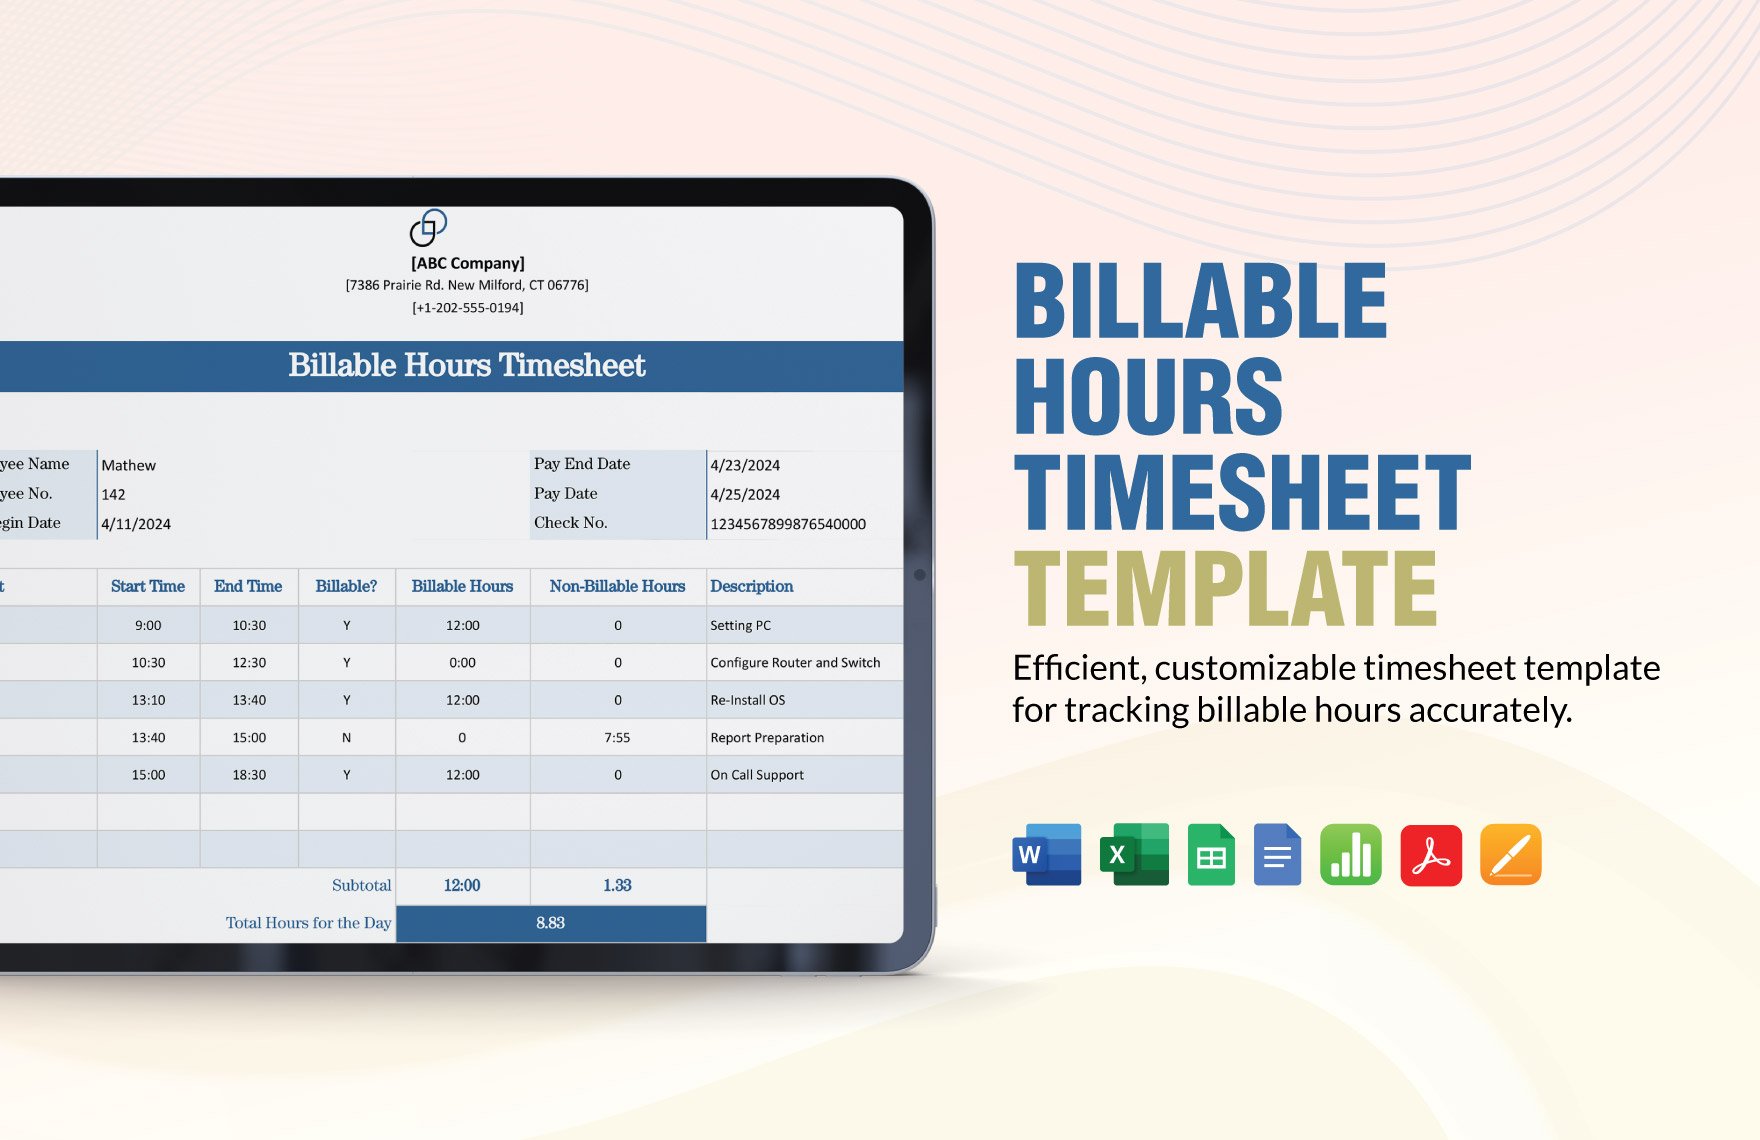 Billable Hours Timesheet Template in Word, Google Docs, Excel, PDF, Google Sheets, Apple Pages, Apple Numbers